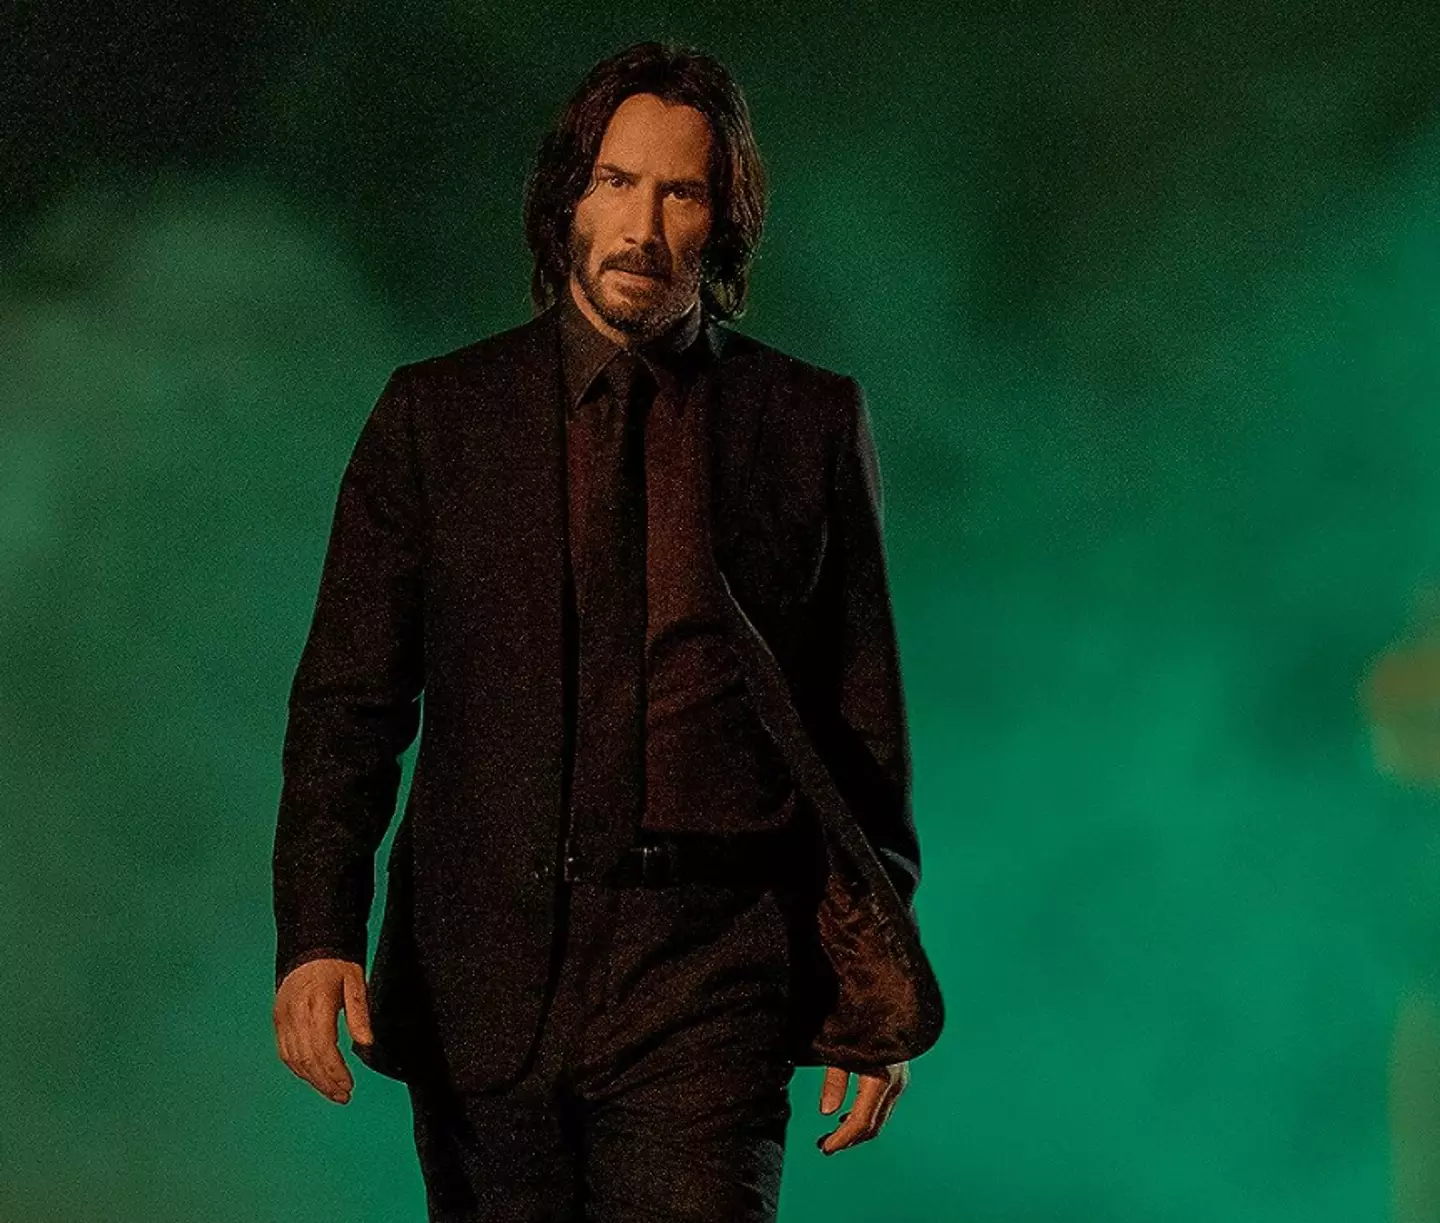 Keanu Reeves has hardly aged since his first onscreen appearance.